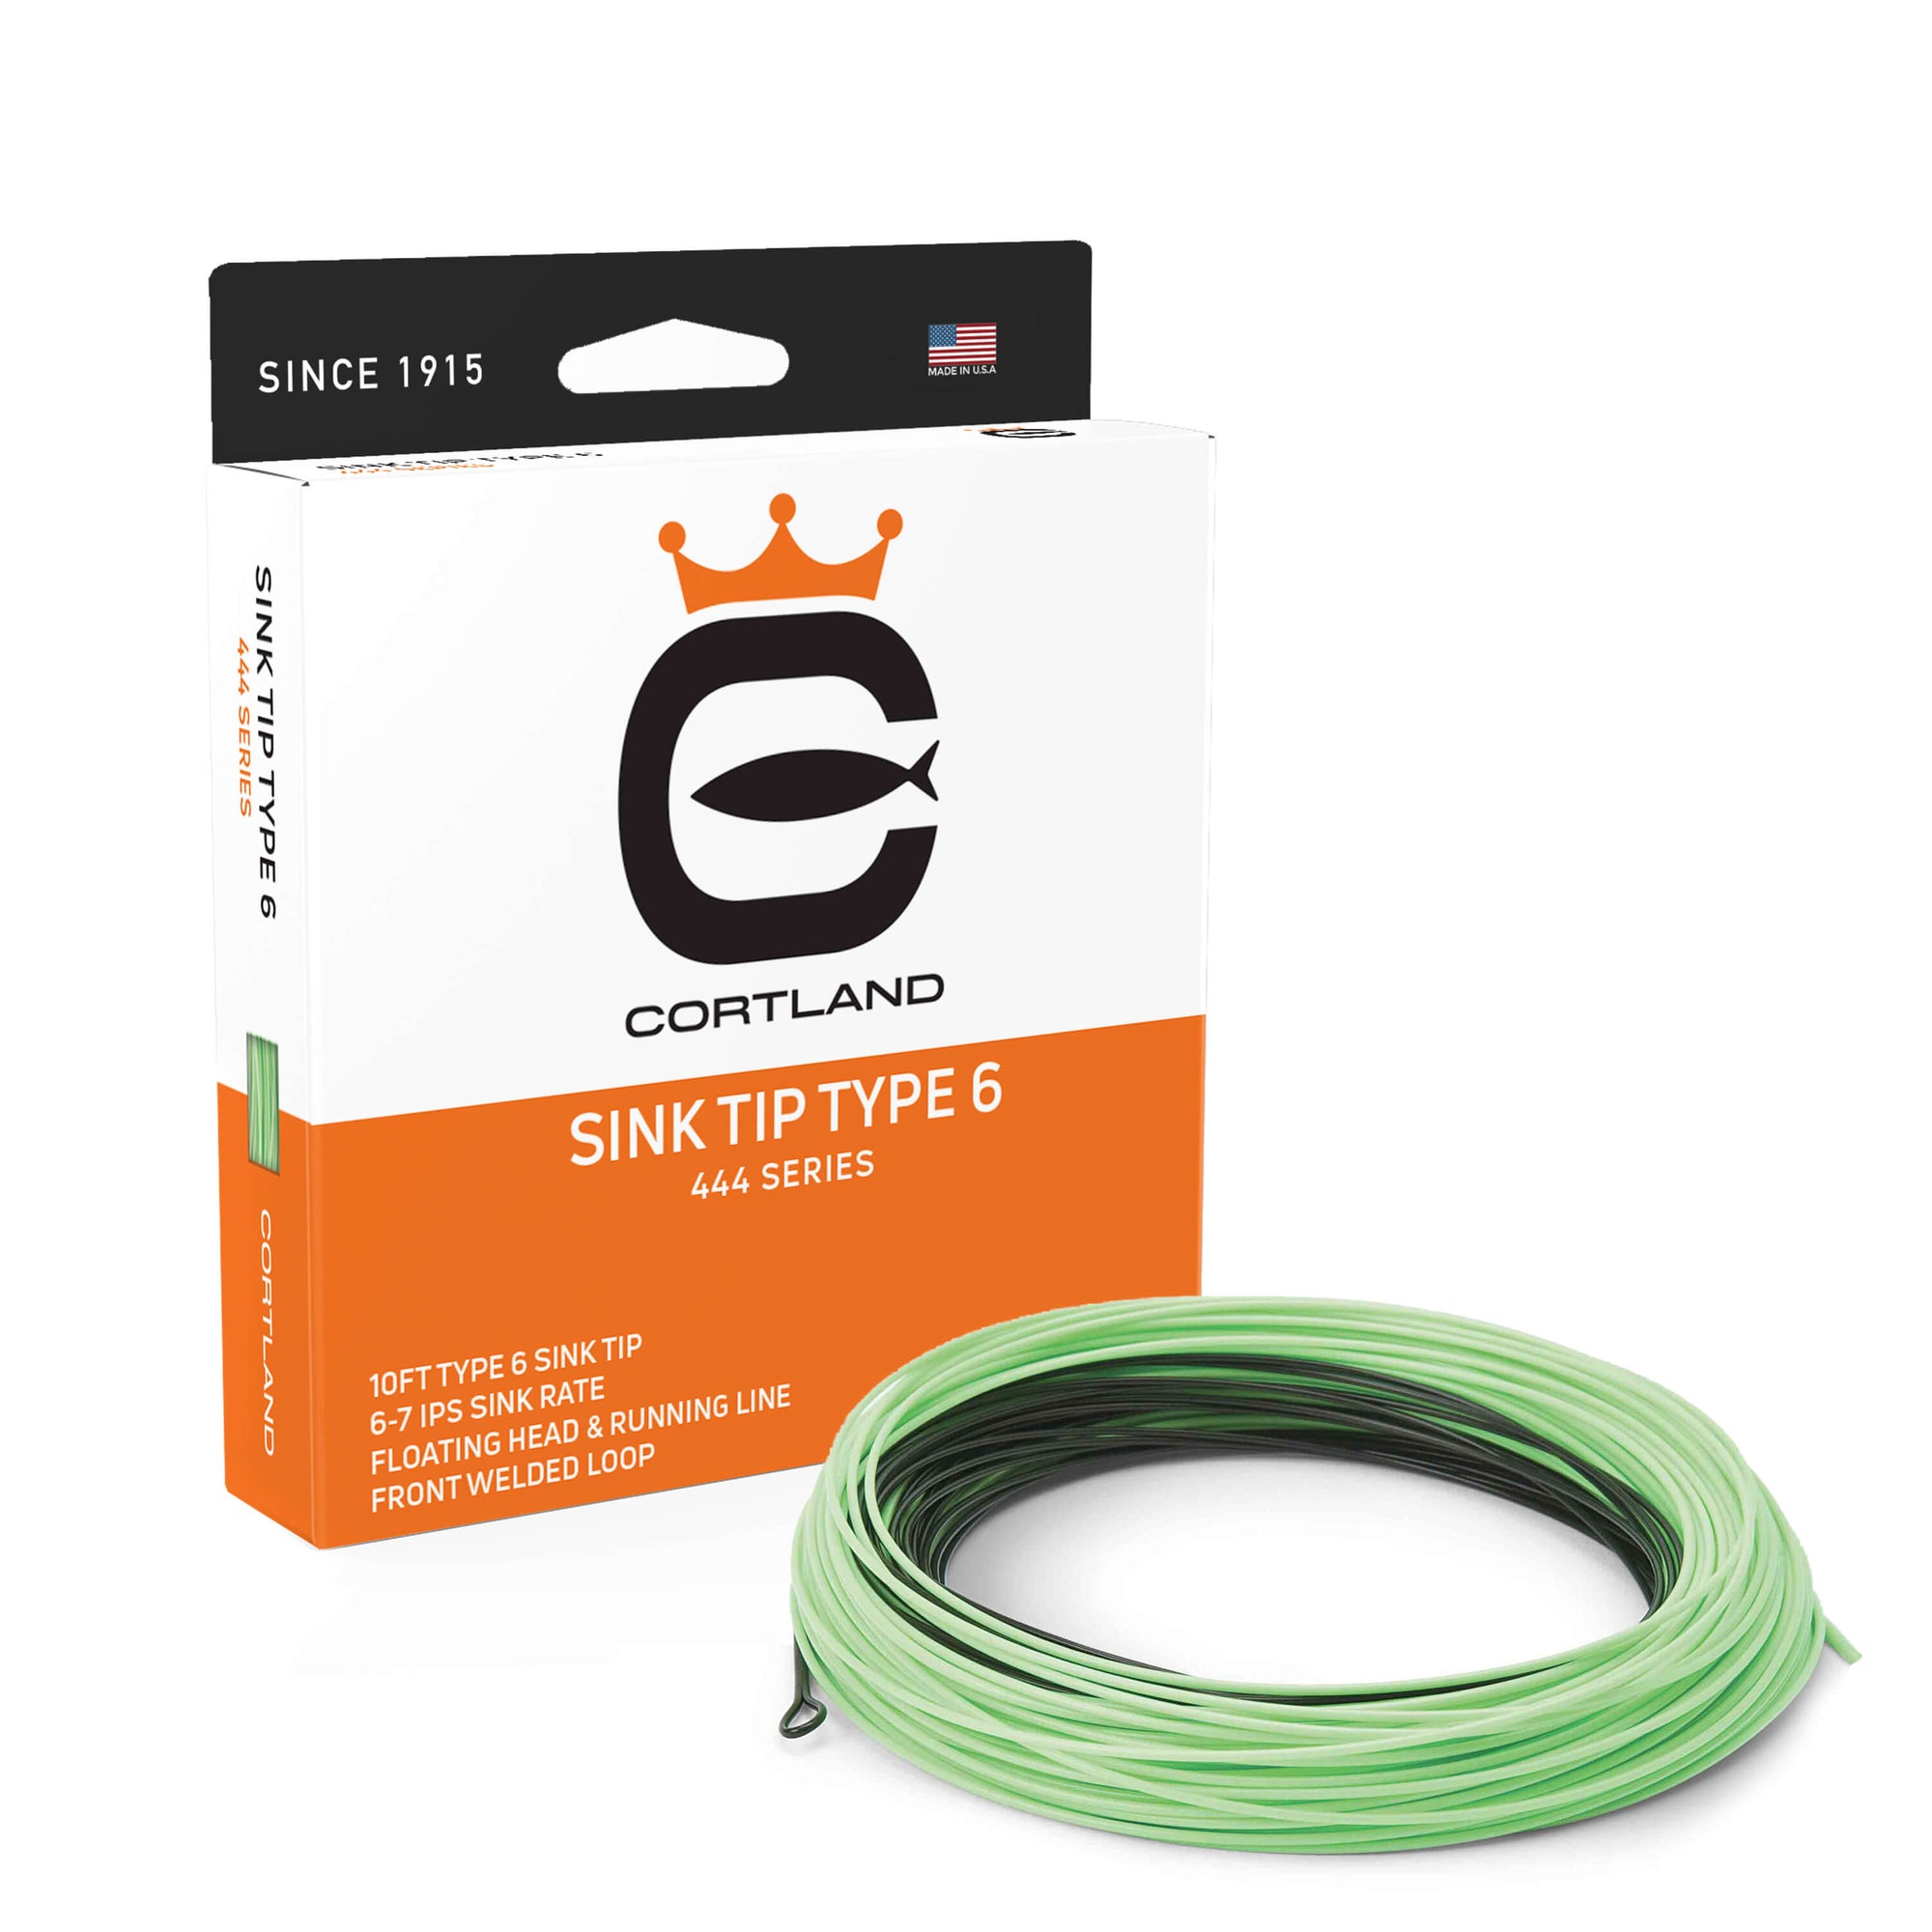 444 Series Sink Tip Type 6 Fly Line Box and coil. The coil is mint green and black. The box is orange, white, and black. 